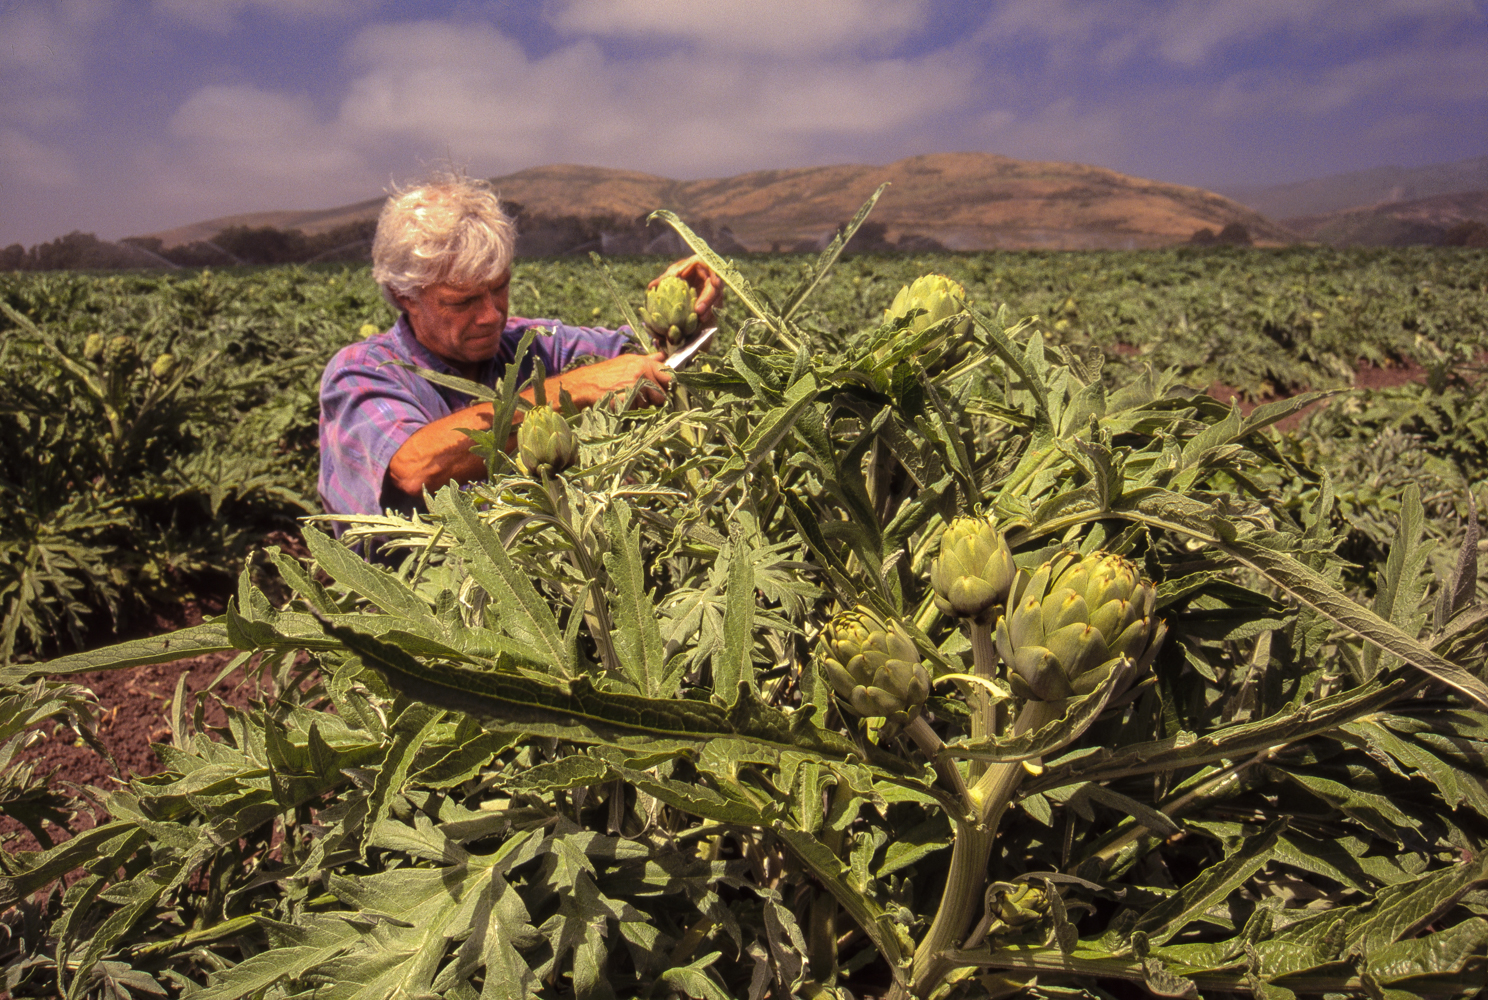 Virtually all U.S. commercially-grown artichokes are from California, and three-fourths of those are from the Castroville area of Monterey County.